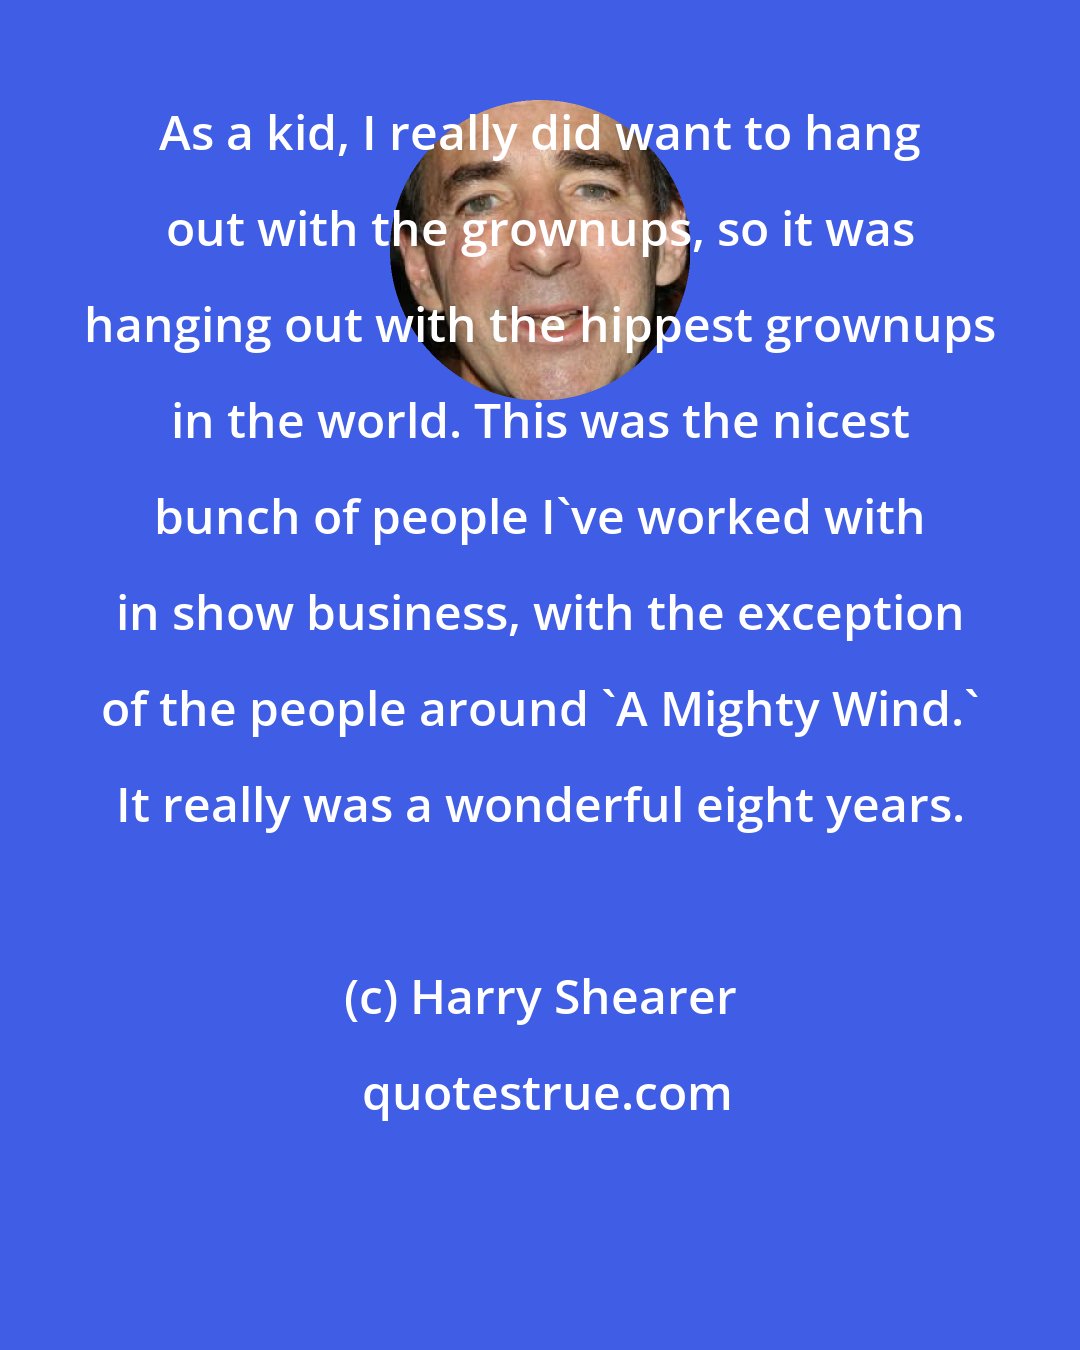 Harry Shearer: As a kid, I really did want to hang out with the grownups, so it was hanging out with the hippest grownups in the world. This was the nicest bunch of people I've worked with in show business, with the exception of the people around 'A Mighty Wind.' It really was a wonderful eight years.